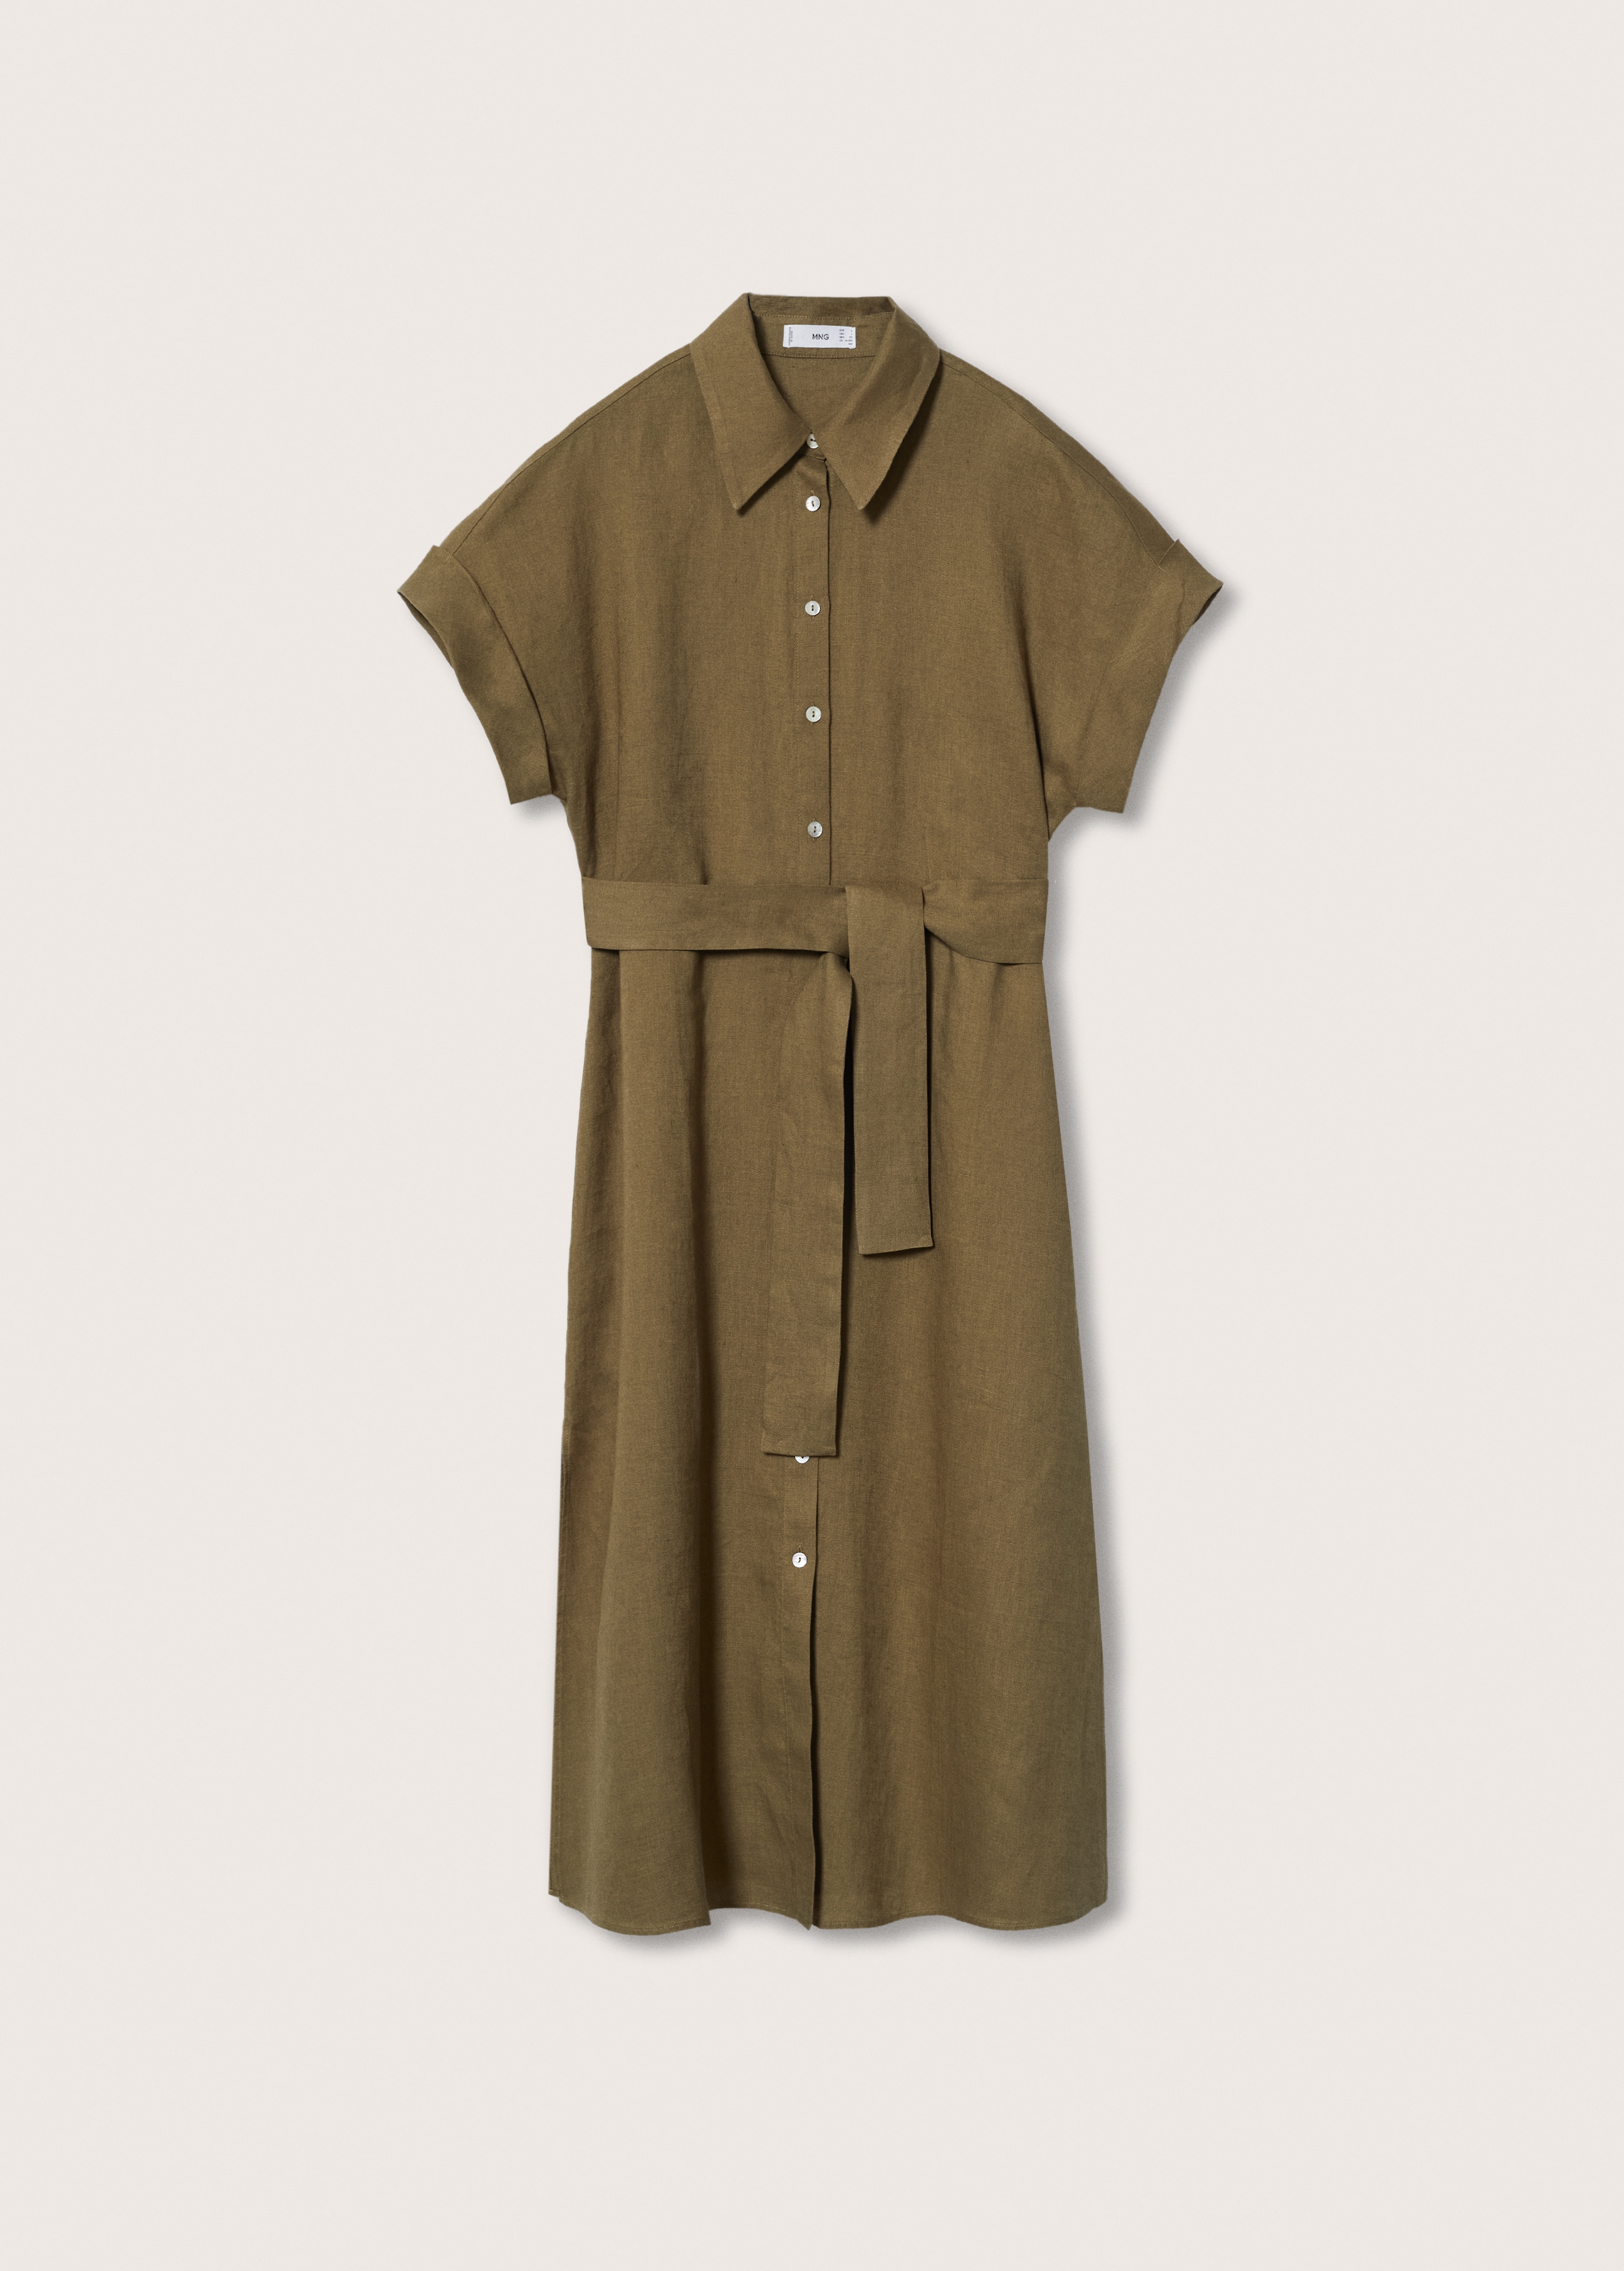 100% linen shirty dress - Article without model